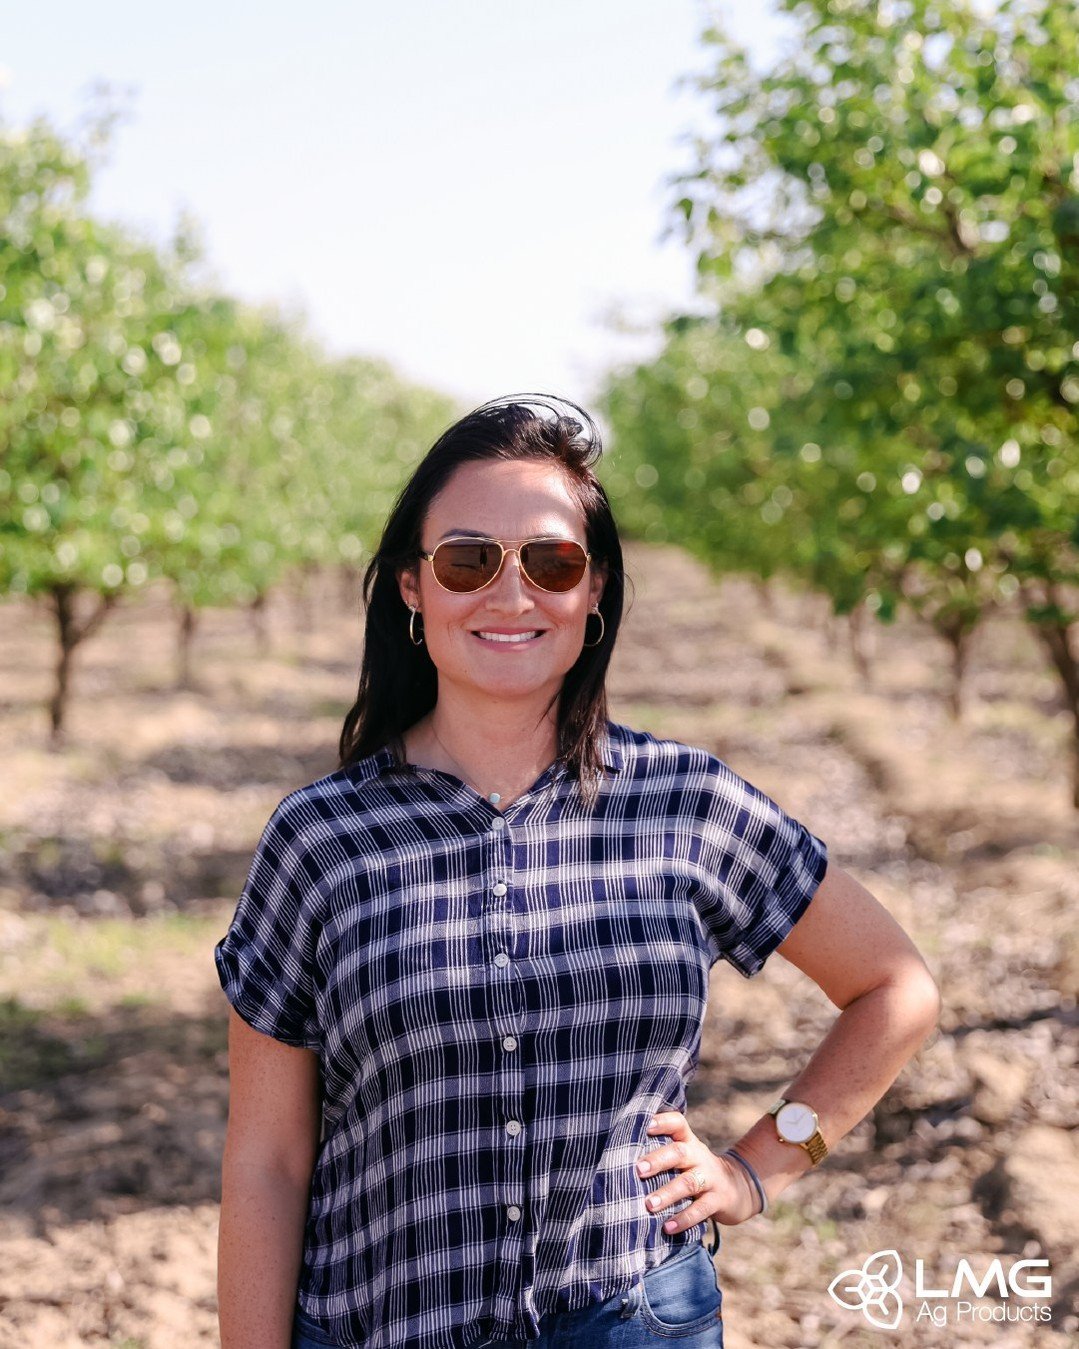 Meet this month's farmer, Elaine Guerrero Clar!🍊🌳

Elaine's parents ranch has been around for over 35 years in Exeter, Ca. Her dad originally started farming grapes, then turned it over to sell hay, and after that he decided he wanted to start farm